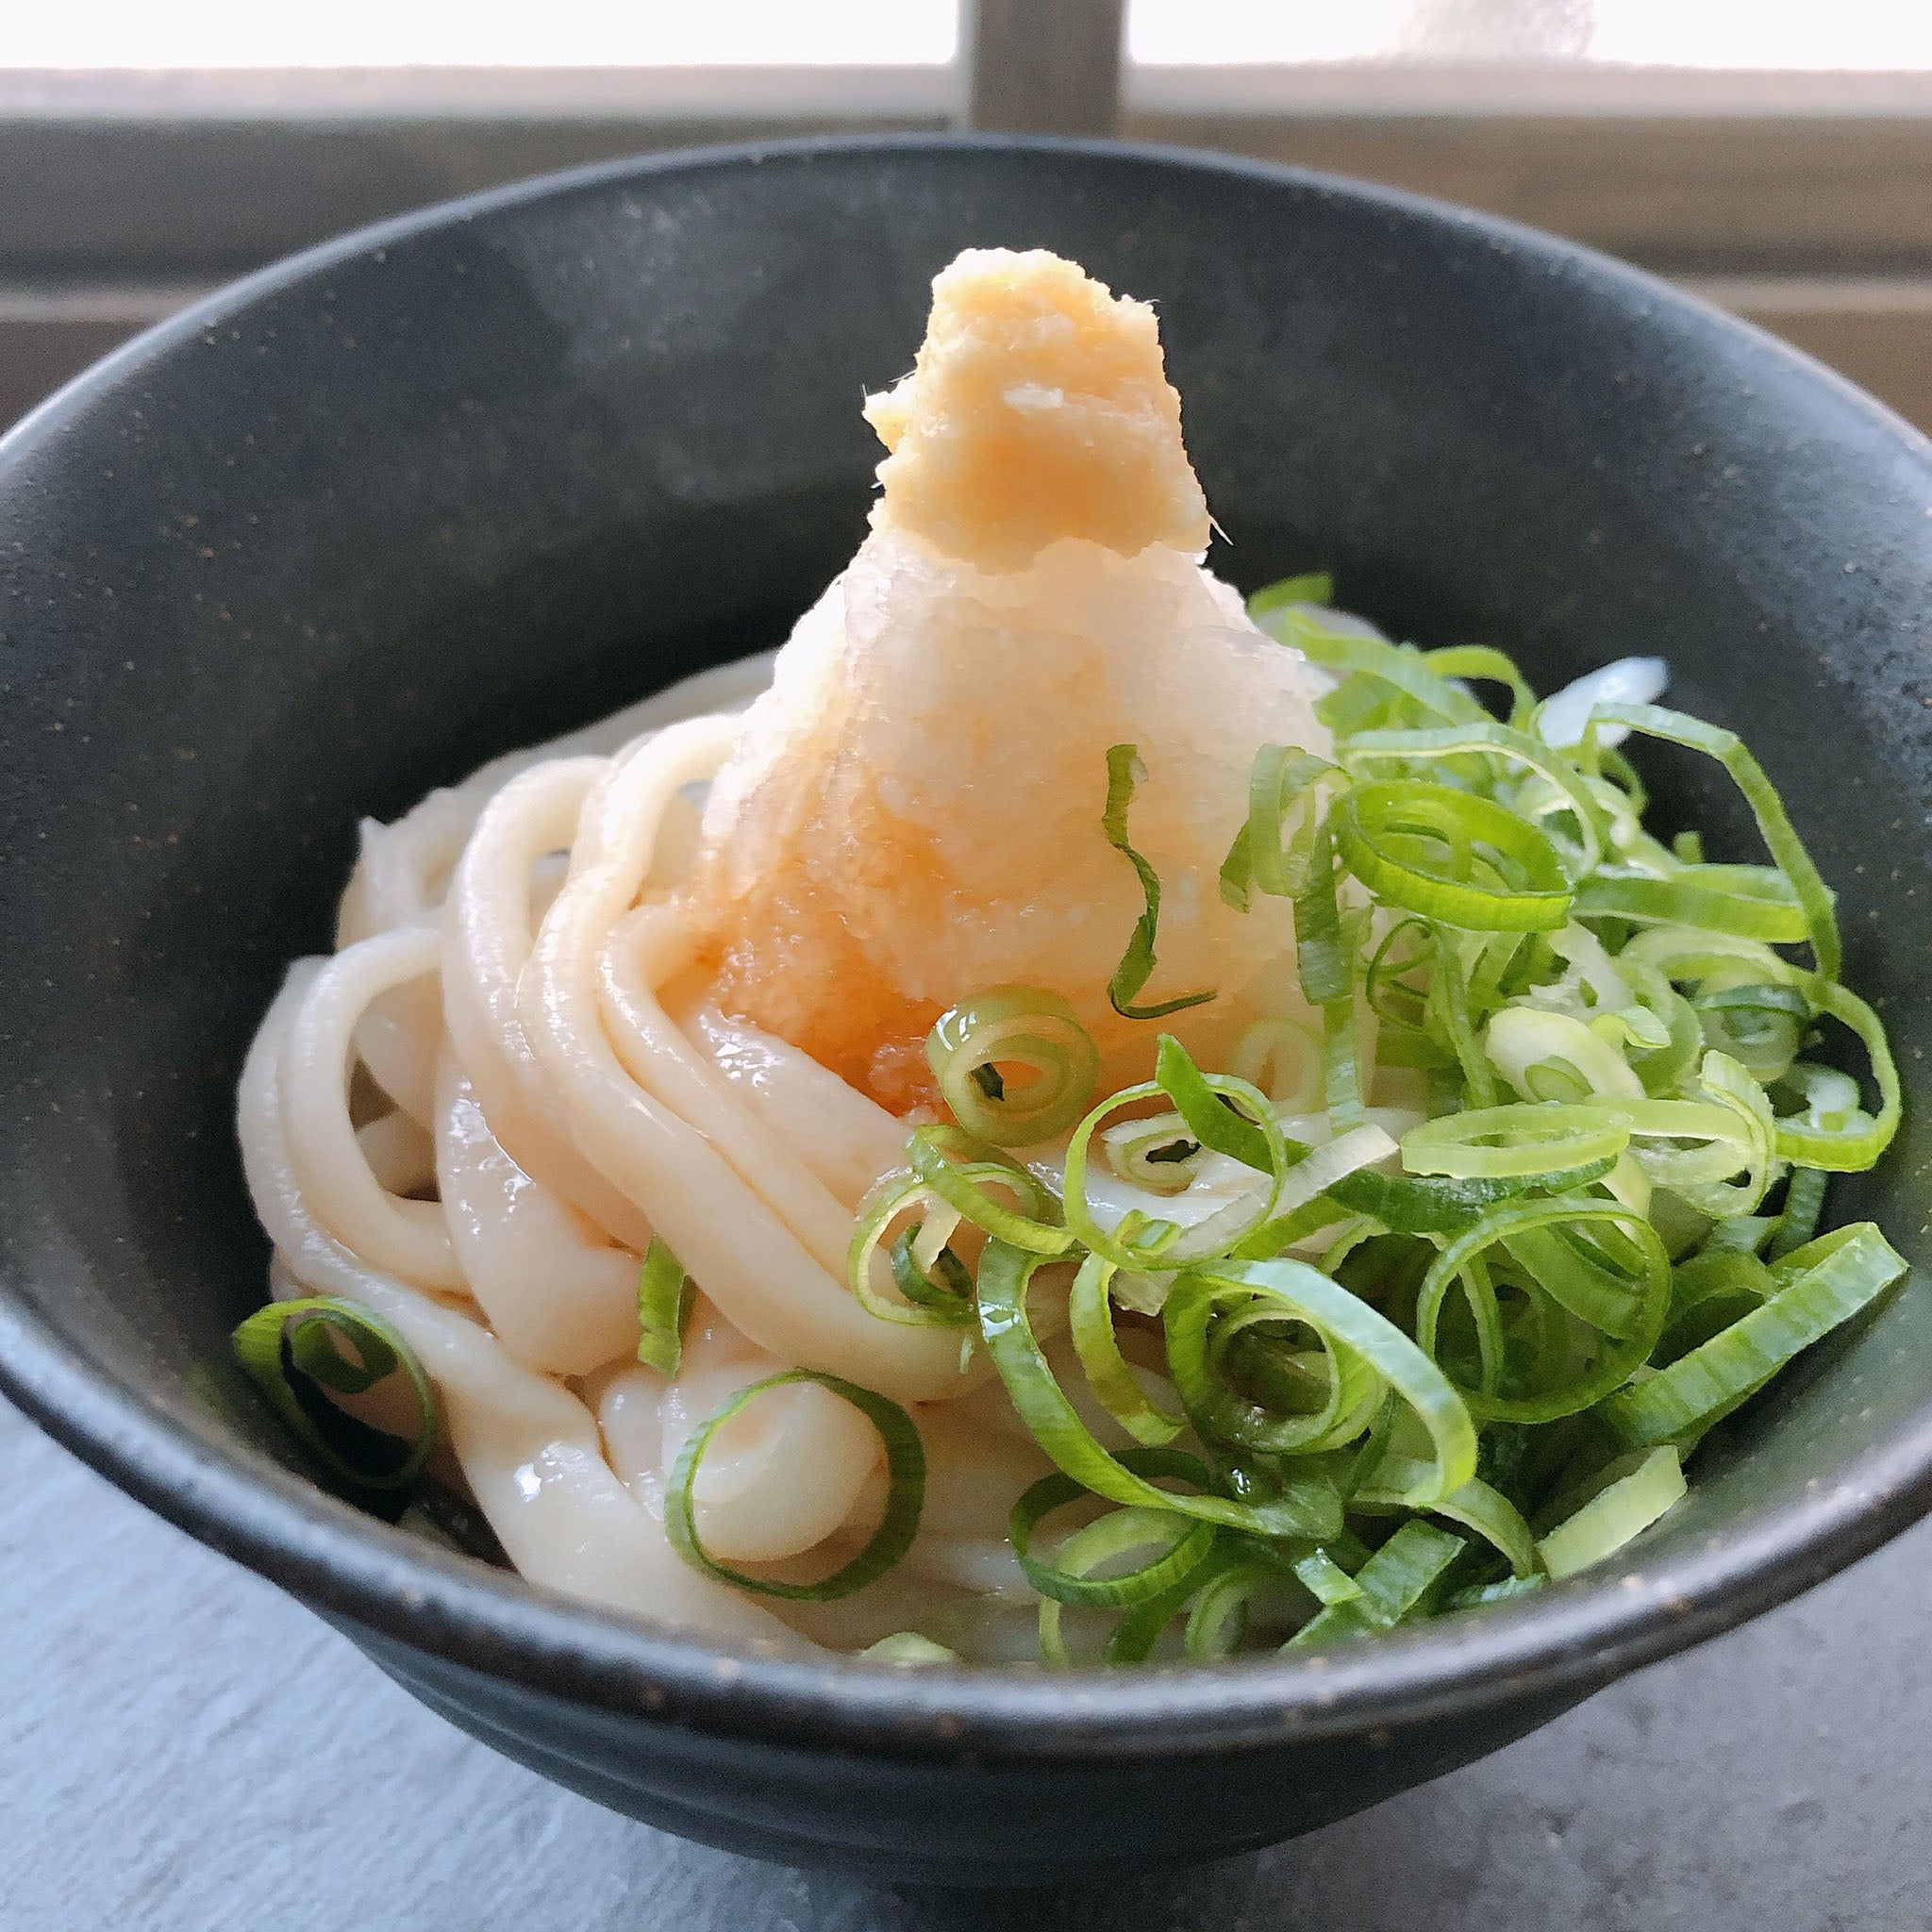 Kijoyu Udon (recipe of udon noodle included)